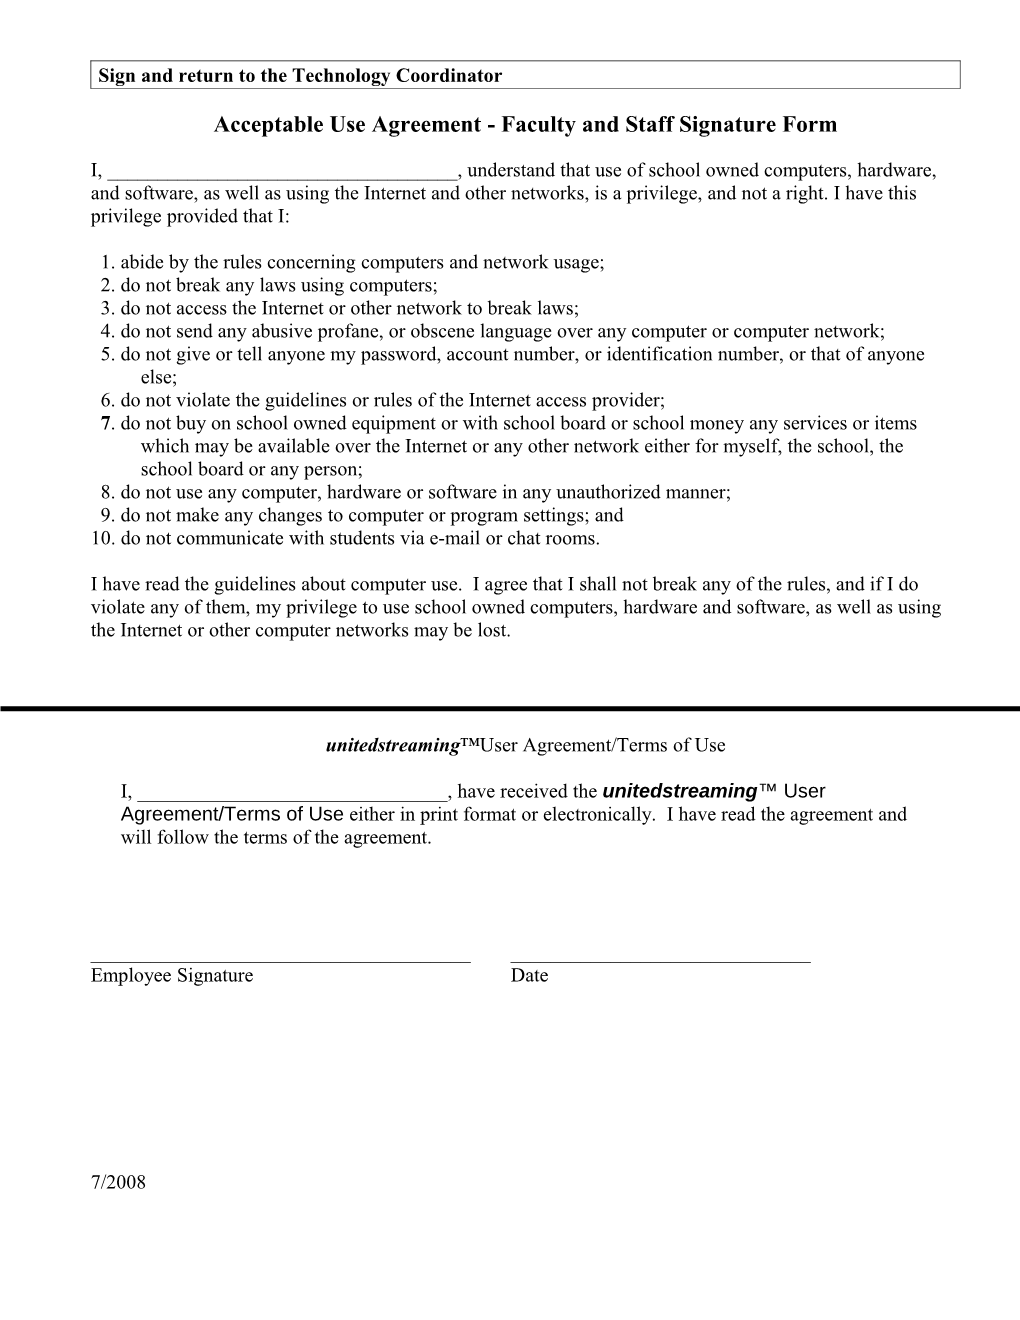 Acceptable Use Agreement - Faculty and Staff Signature Form